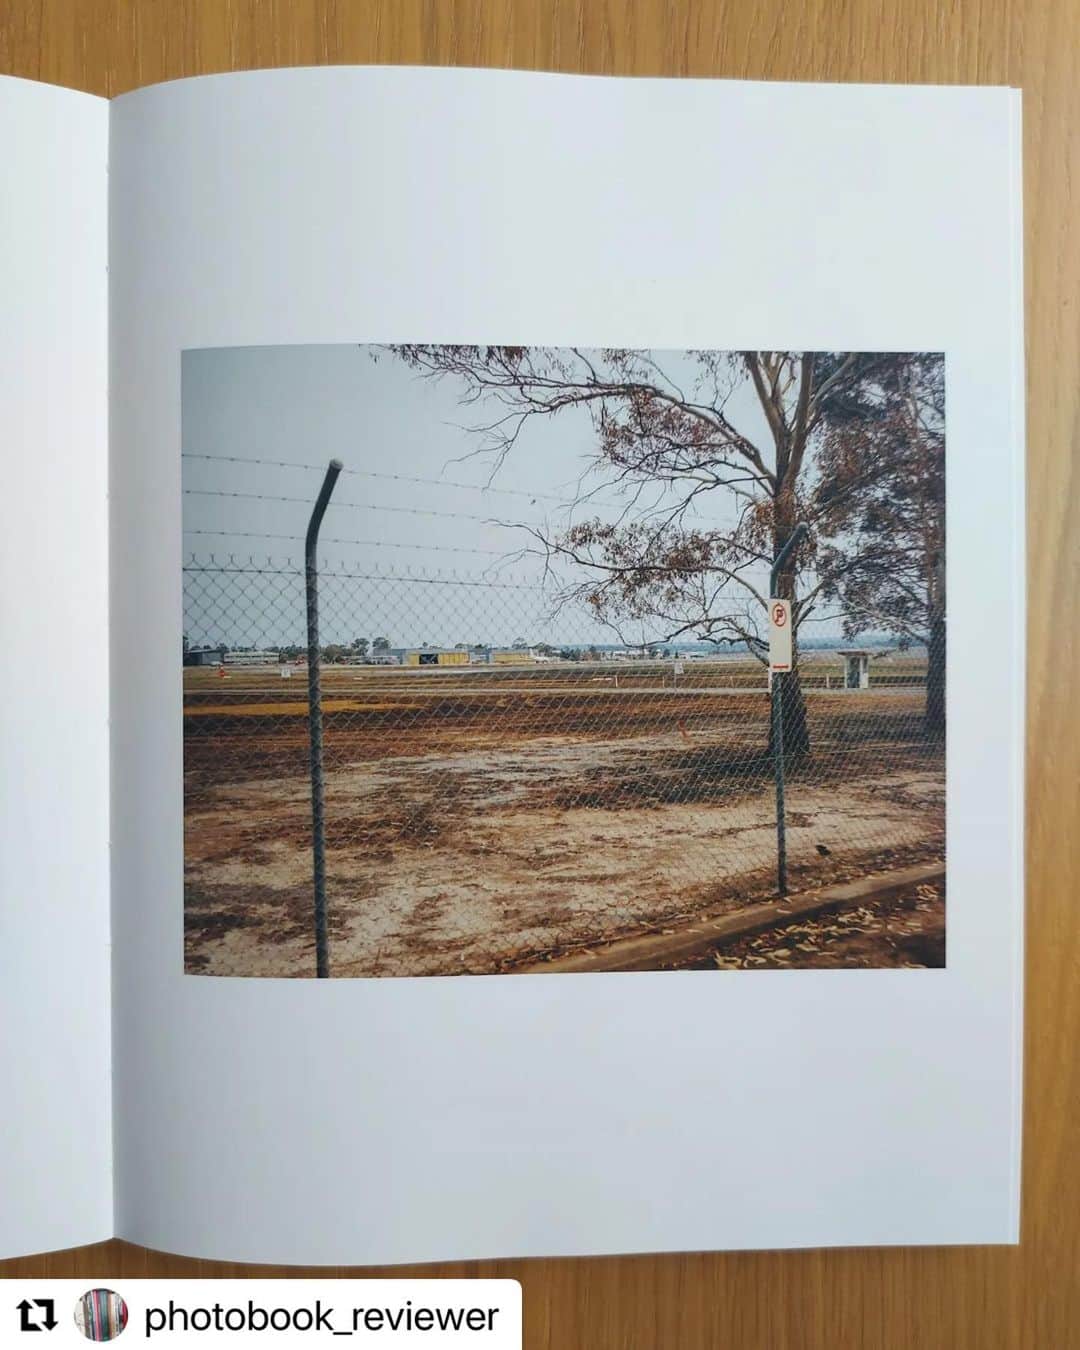 柏田テツヲさんのインスタグラム写真 - (柏田テツヲInstagram)「#Repost @photobook_reviewer with @use.repost ・・・ Into the Gray by Tetsuo Kashiwada (@tetsuokashiwada) - From destruction comes new life. Yet something remains lost. An ungraspable loss that burrows beneath skin and bone and deeper still. - Colour returns gradually like the slow awakening after a long sleep. New shoots appear in fits and starts through cracks in the blackened earth. The violence receeds from the air. Yet, that sense of loss persists. - To document destruction is to speak of an undoing, a slow and painful unfolding of what was to what little might remain. An inexorably altered landscape where so much is brushed aside in such a brutally short time. It is also to look beyond the bruised and broken surface and find some light.  Maybe only a glimmer remains but, that glimmer signals hope. - The sky itself seems lost, graceless and devoid of colour. The birds flee in droves, foreshadowing what is to follow. The highway breaks the fires merciless march, an invisible wall separating life and death. The smoke chokes and cloaks the air in a silvery softness. Trees stand, yet blackened now, shadows without their host. - The forests now stripped of their hues, their multitudes of browns and yellows, crimson and dusty pink. A new palette of silver, charcoal, and muddy in betweens has taken hold. Bottles and bones and unidentifiable detritus litters the forest floor. Signs of death that carry a hint of macabre beauty. - The inferno leaves its mark. A charred fingerprint on a solitary tree. It paints the landscape black with a lick of its white hot brush. Whole vistas reduced to compressed plains, shorn of all undulations. Yet, those who emerged from its shadow gather themselves and rebuild again. - First edition of 400 copies, signed and numbered - Self published」11月2日 9時20分 - tetsuokashiwada